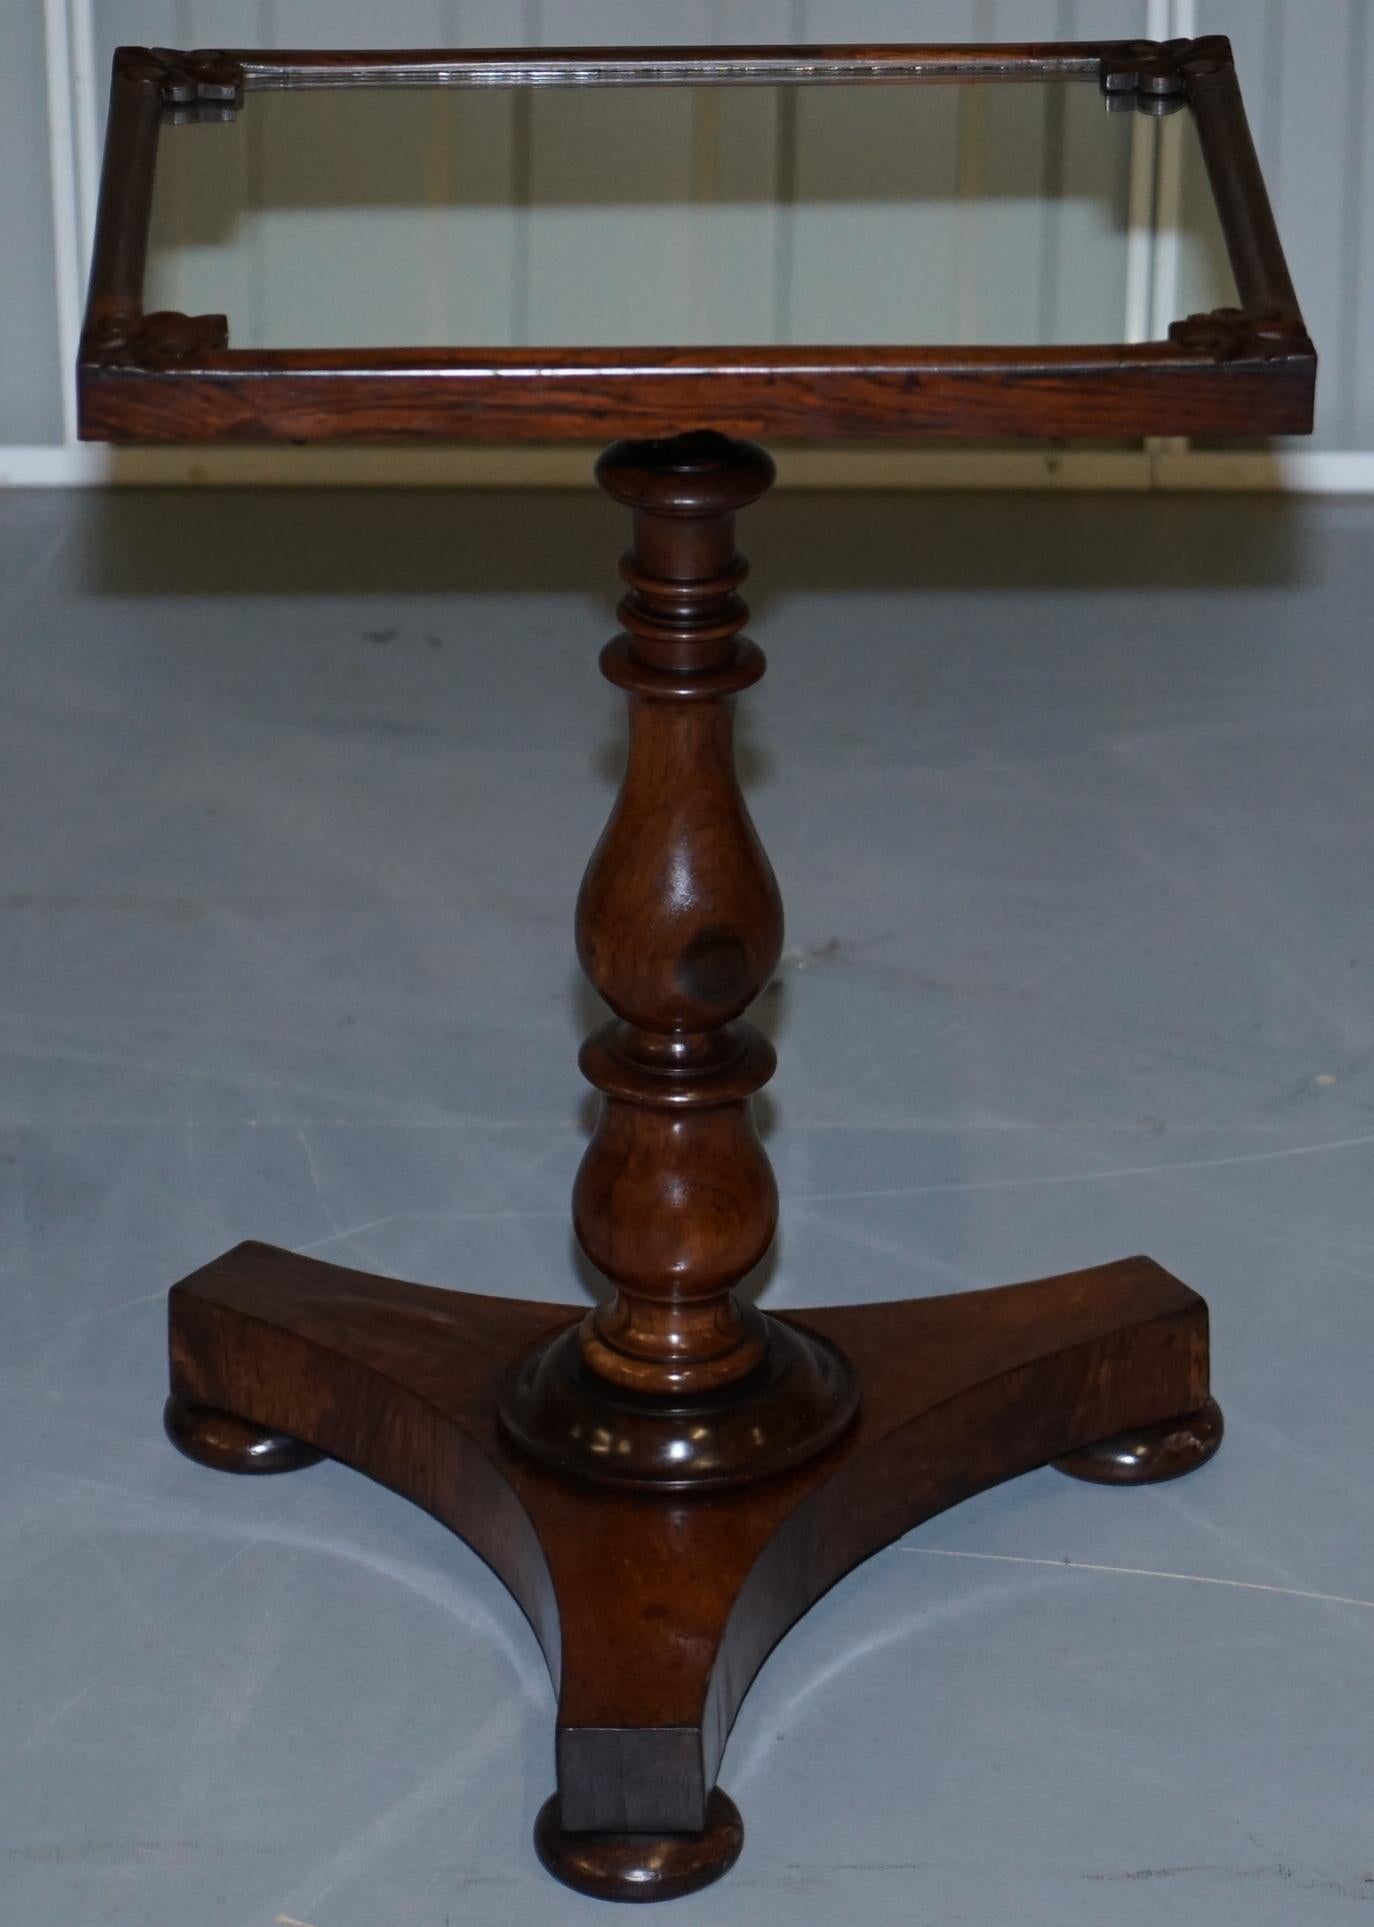 Pair of Stunning Original 1830 William IV Hardwood Mirrored Top Side Lamp Tables For Sale 10